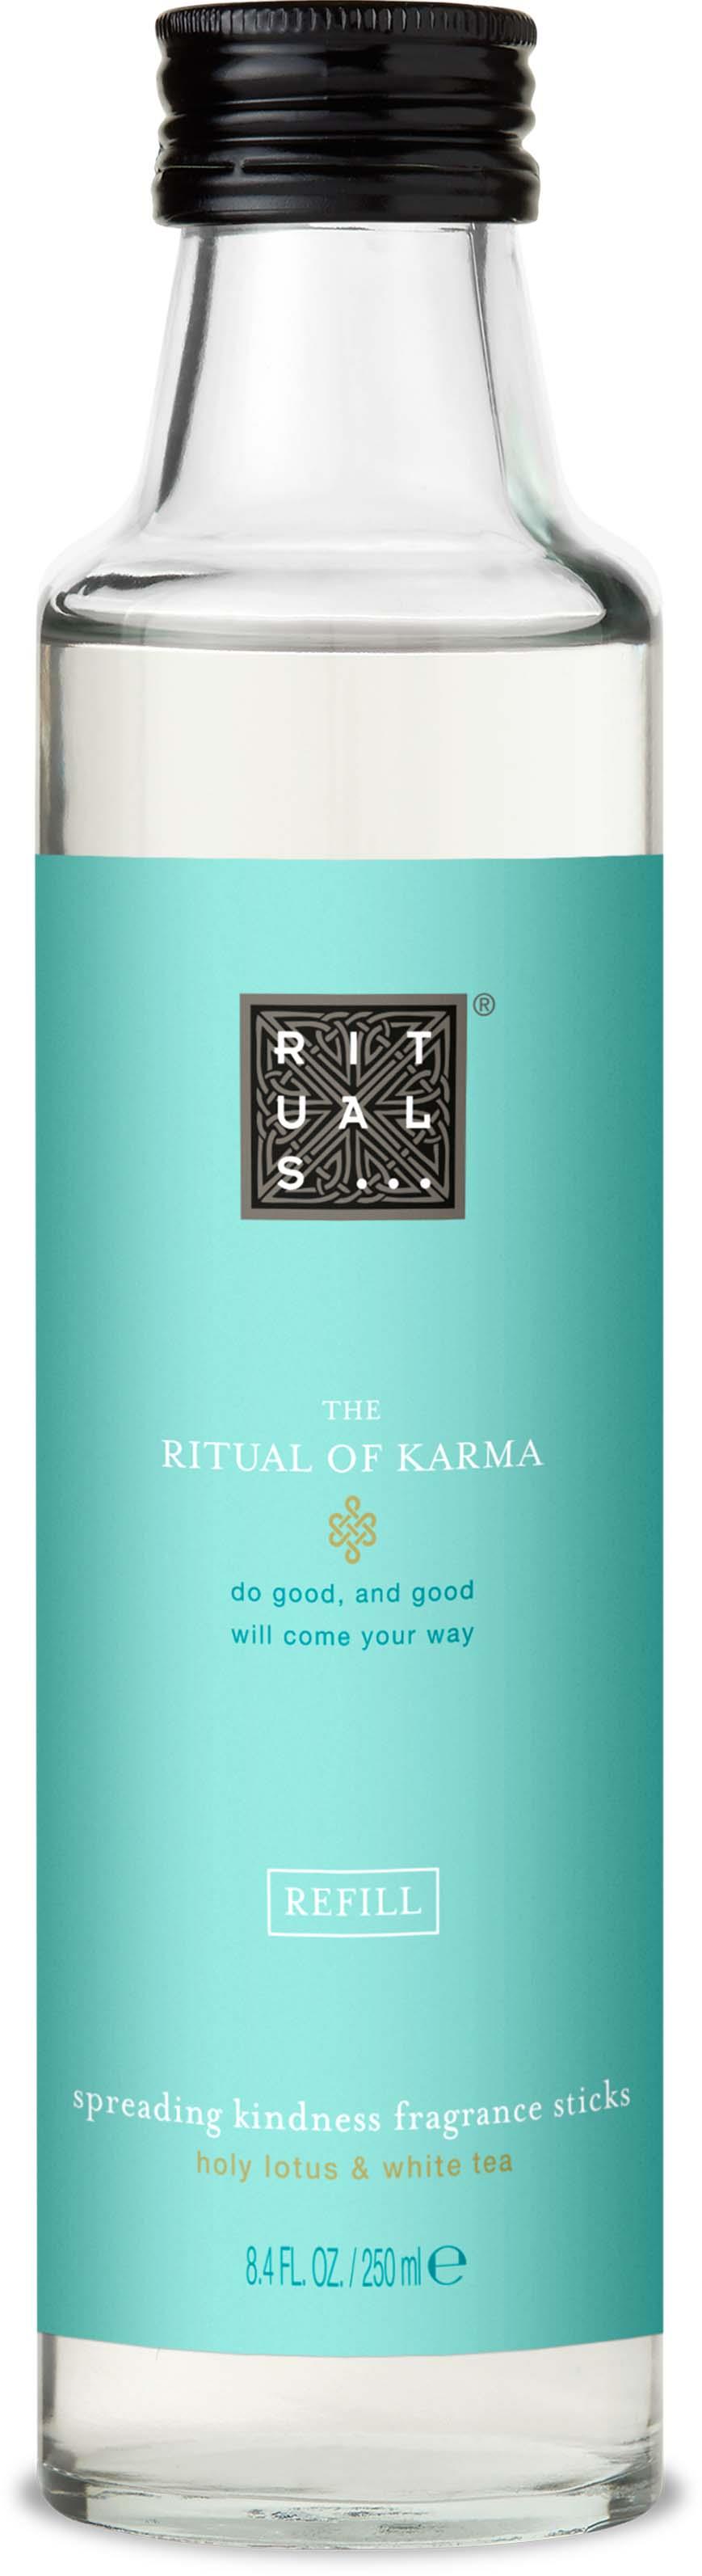 https://lyko.com/globalassets/product-images/rituals-the-ritual-of-karma-refill-fragrance-sticks-250ml-1808-805-0250_1.jpg?ref=9AFD0554B8&w=869&h=3187&quality=75